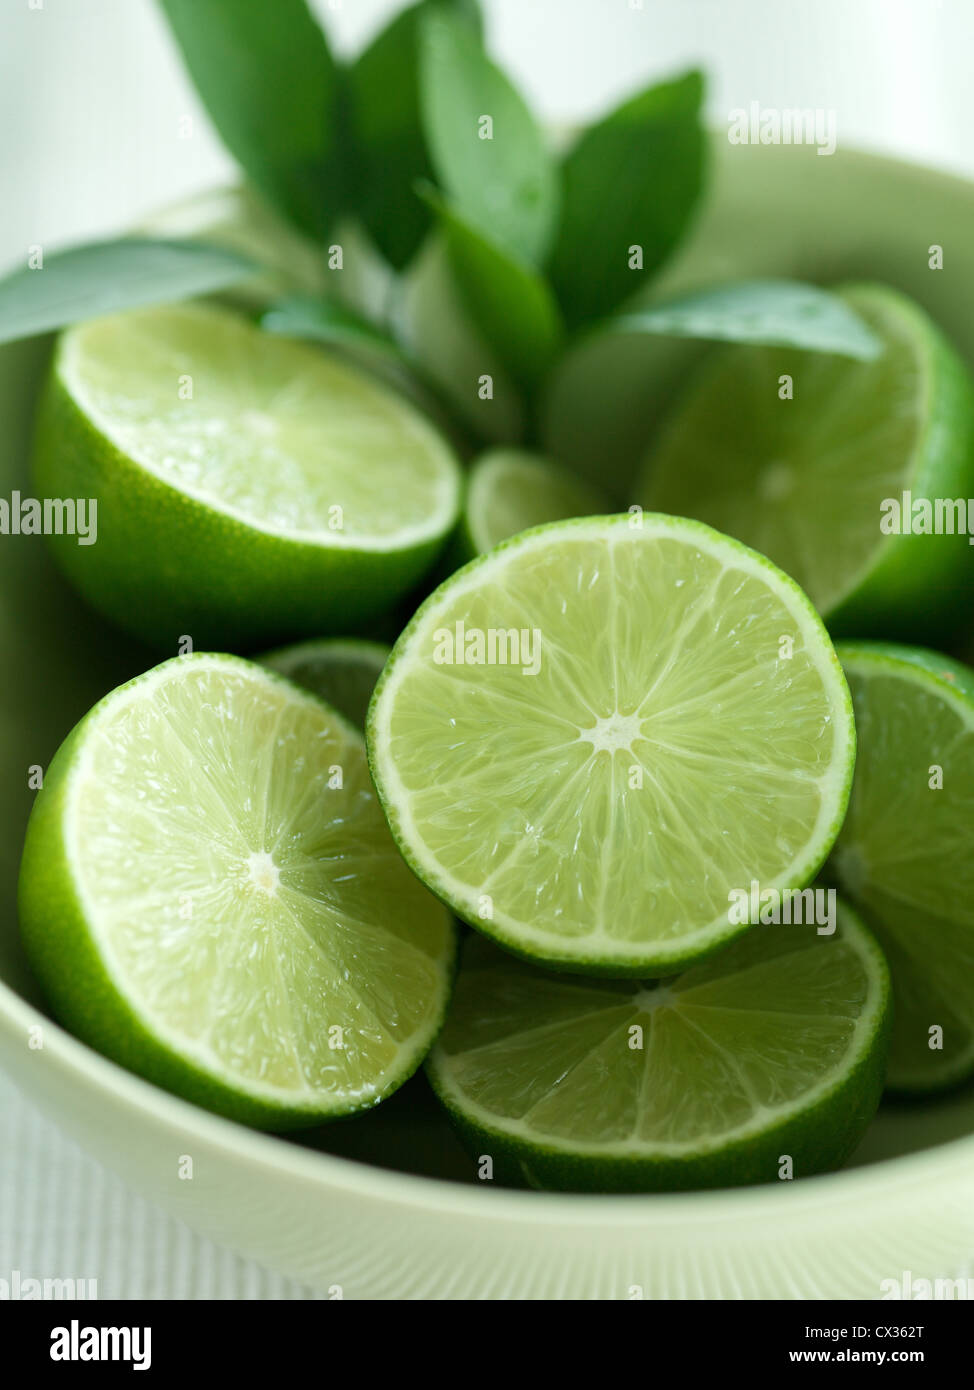 A bowl of fresh limes Stock Photo